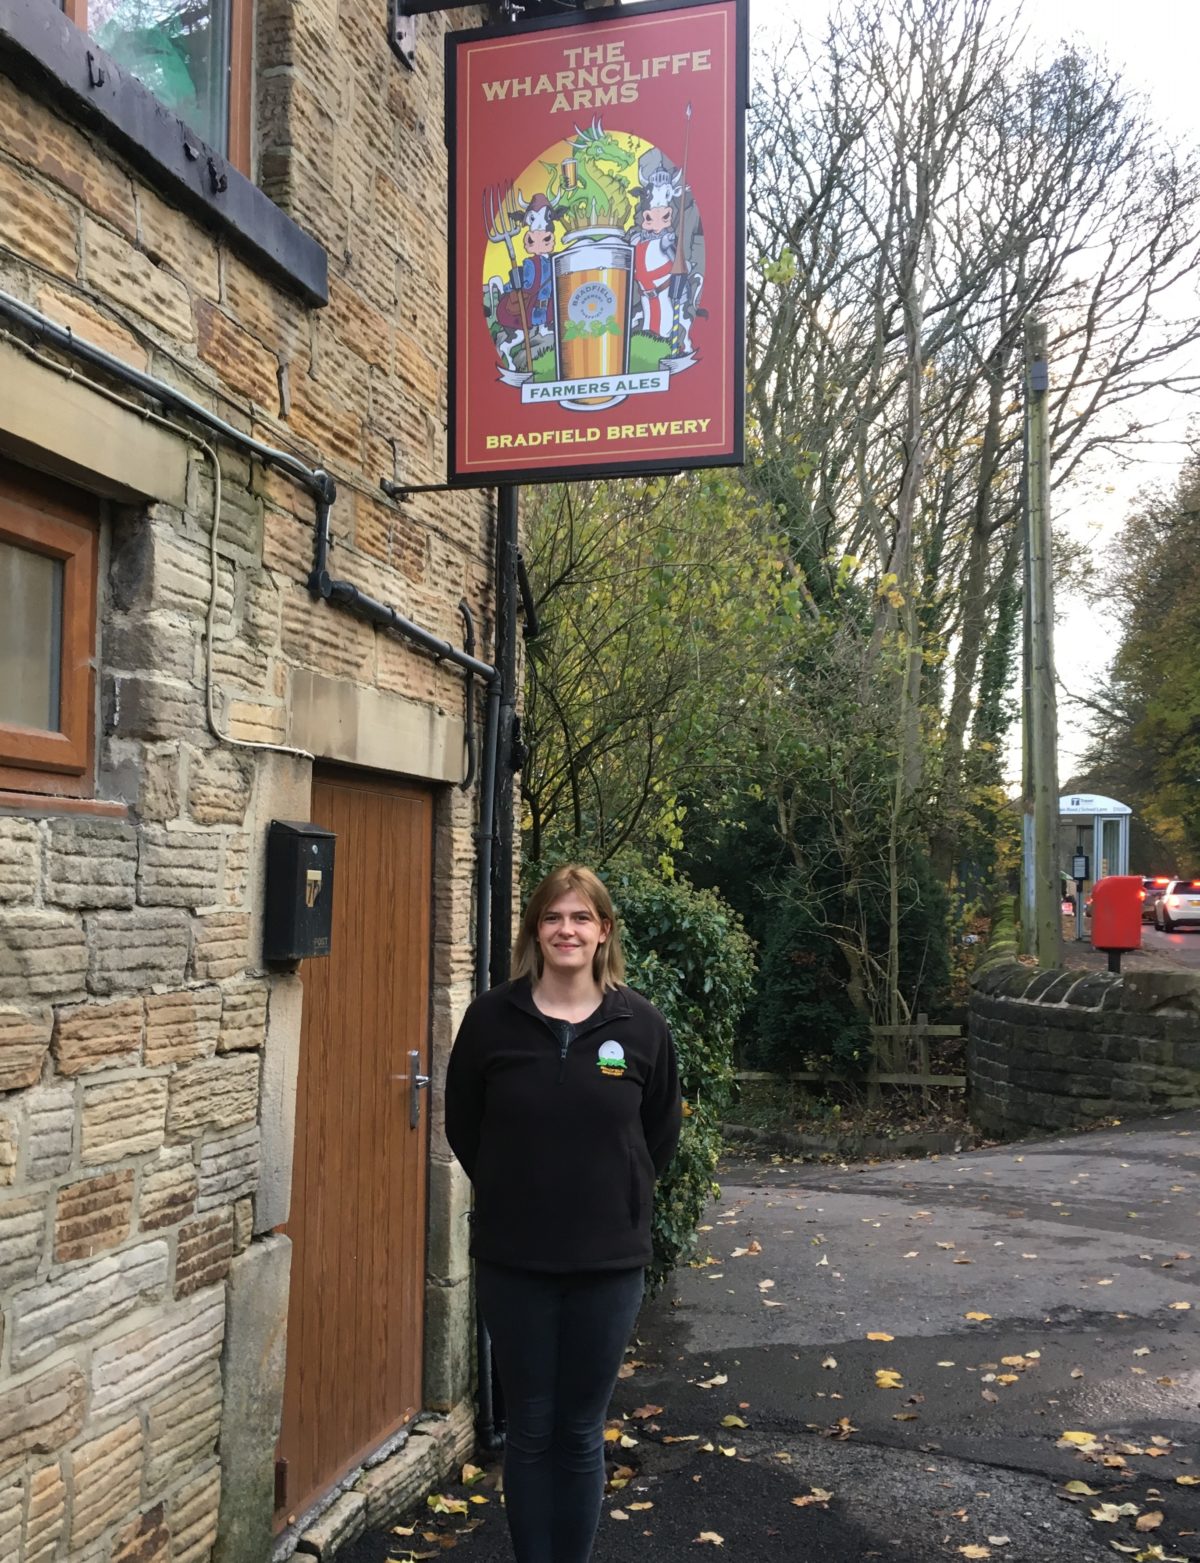 Wharncliffe Arms – Now Open as a Bradfield Brewery Tap!